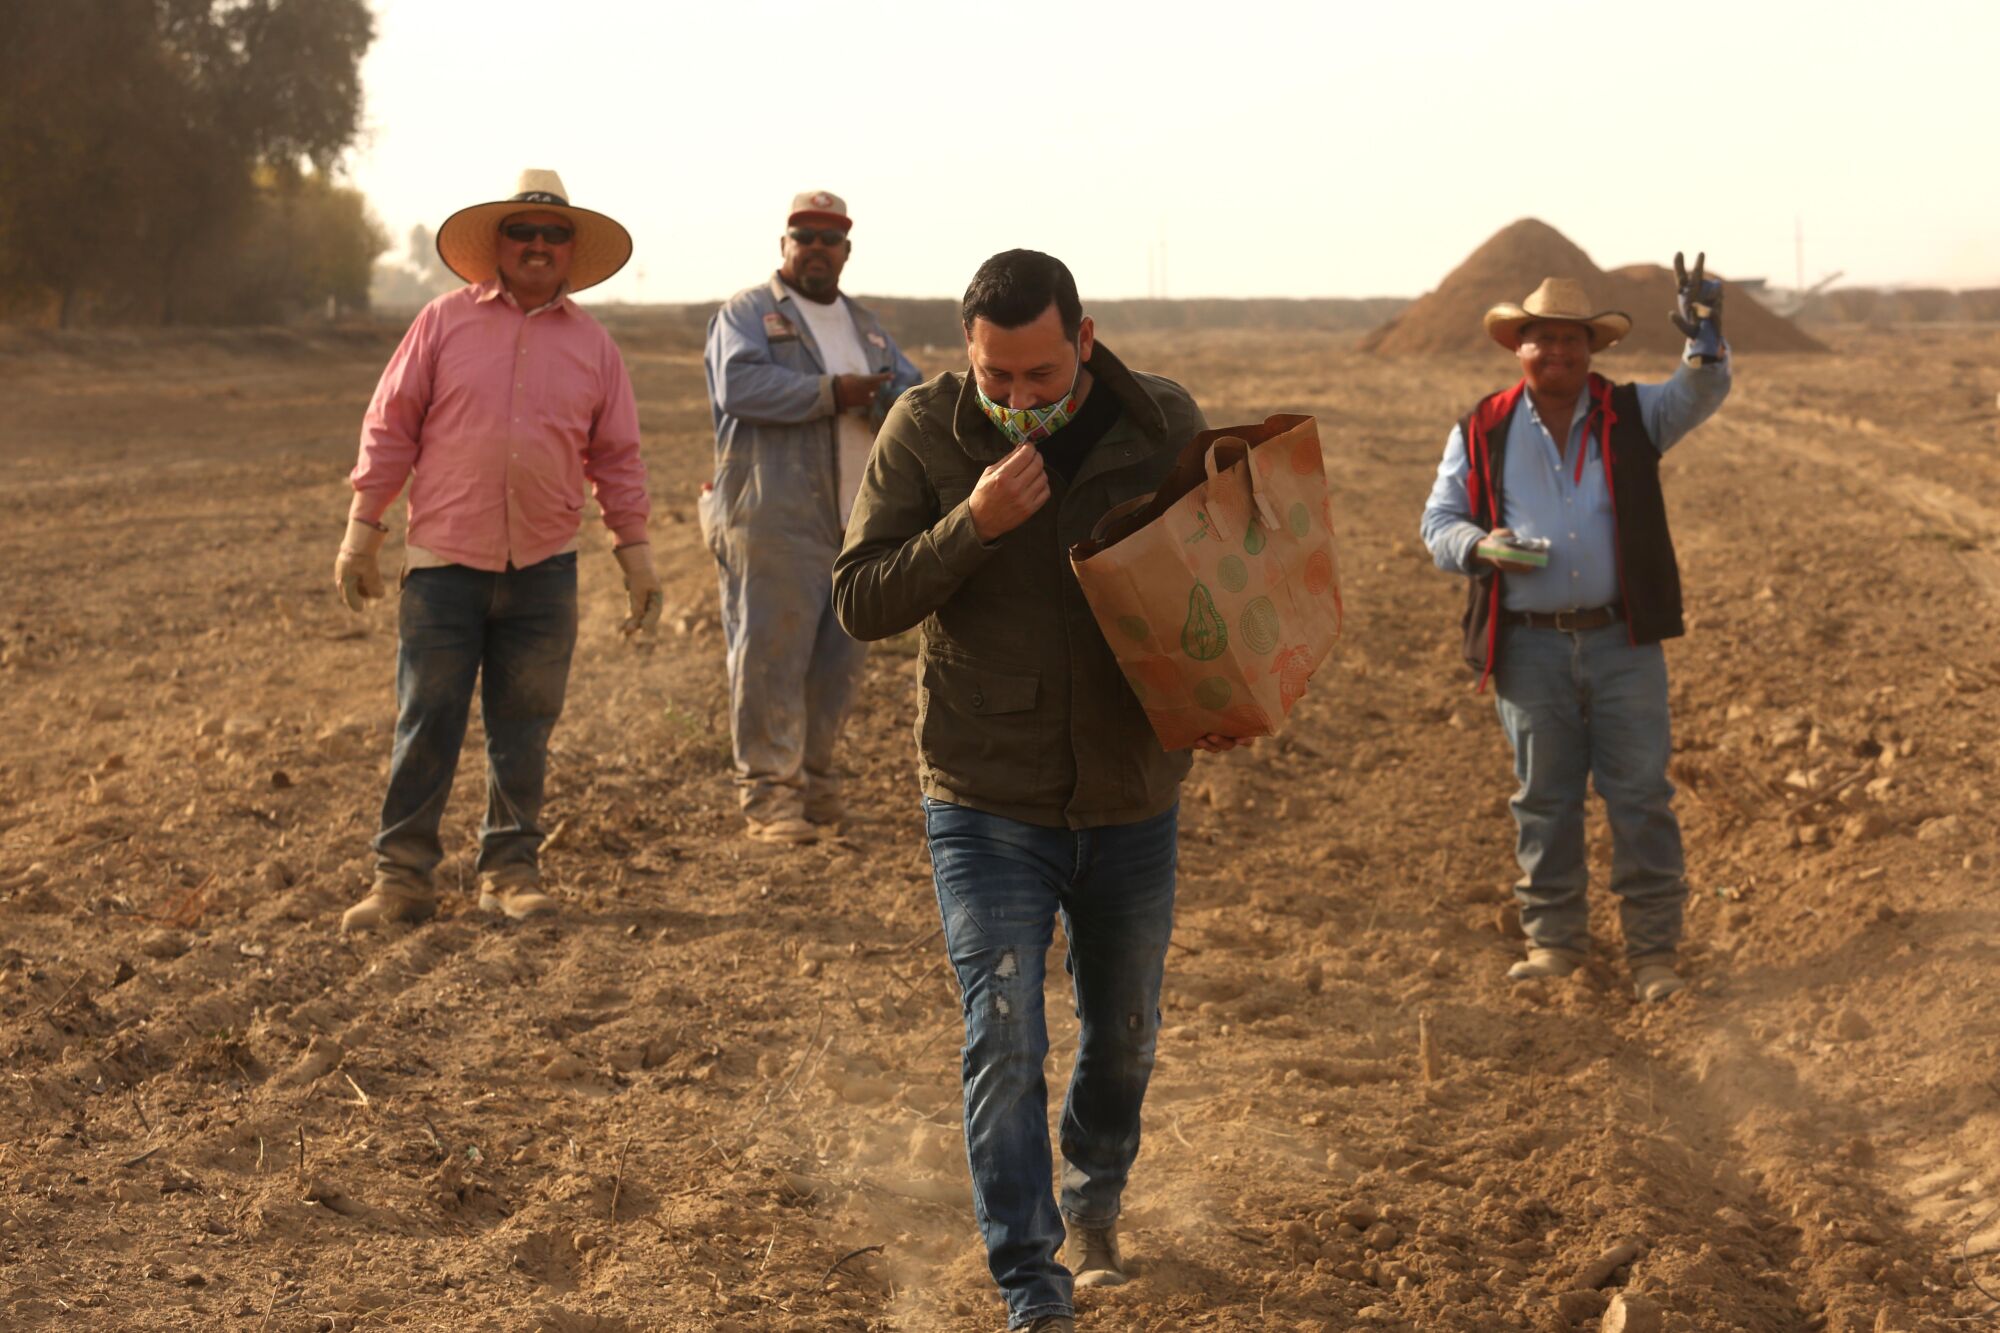 Men in a dusty, barren field wave to a man walking away from them holding a paper bag